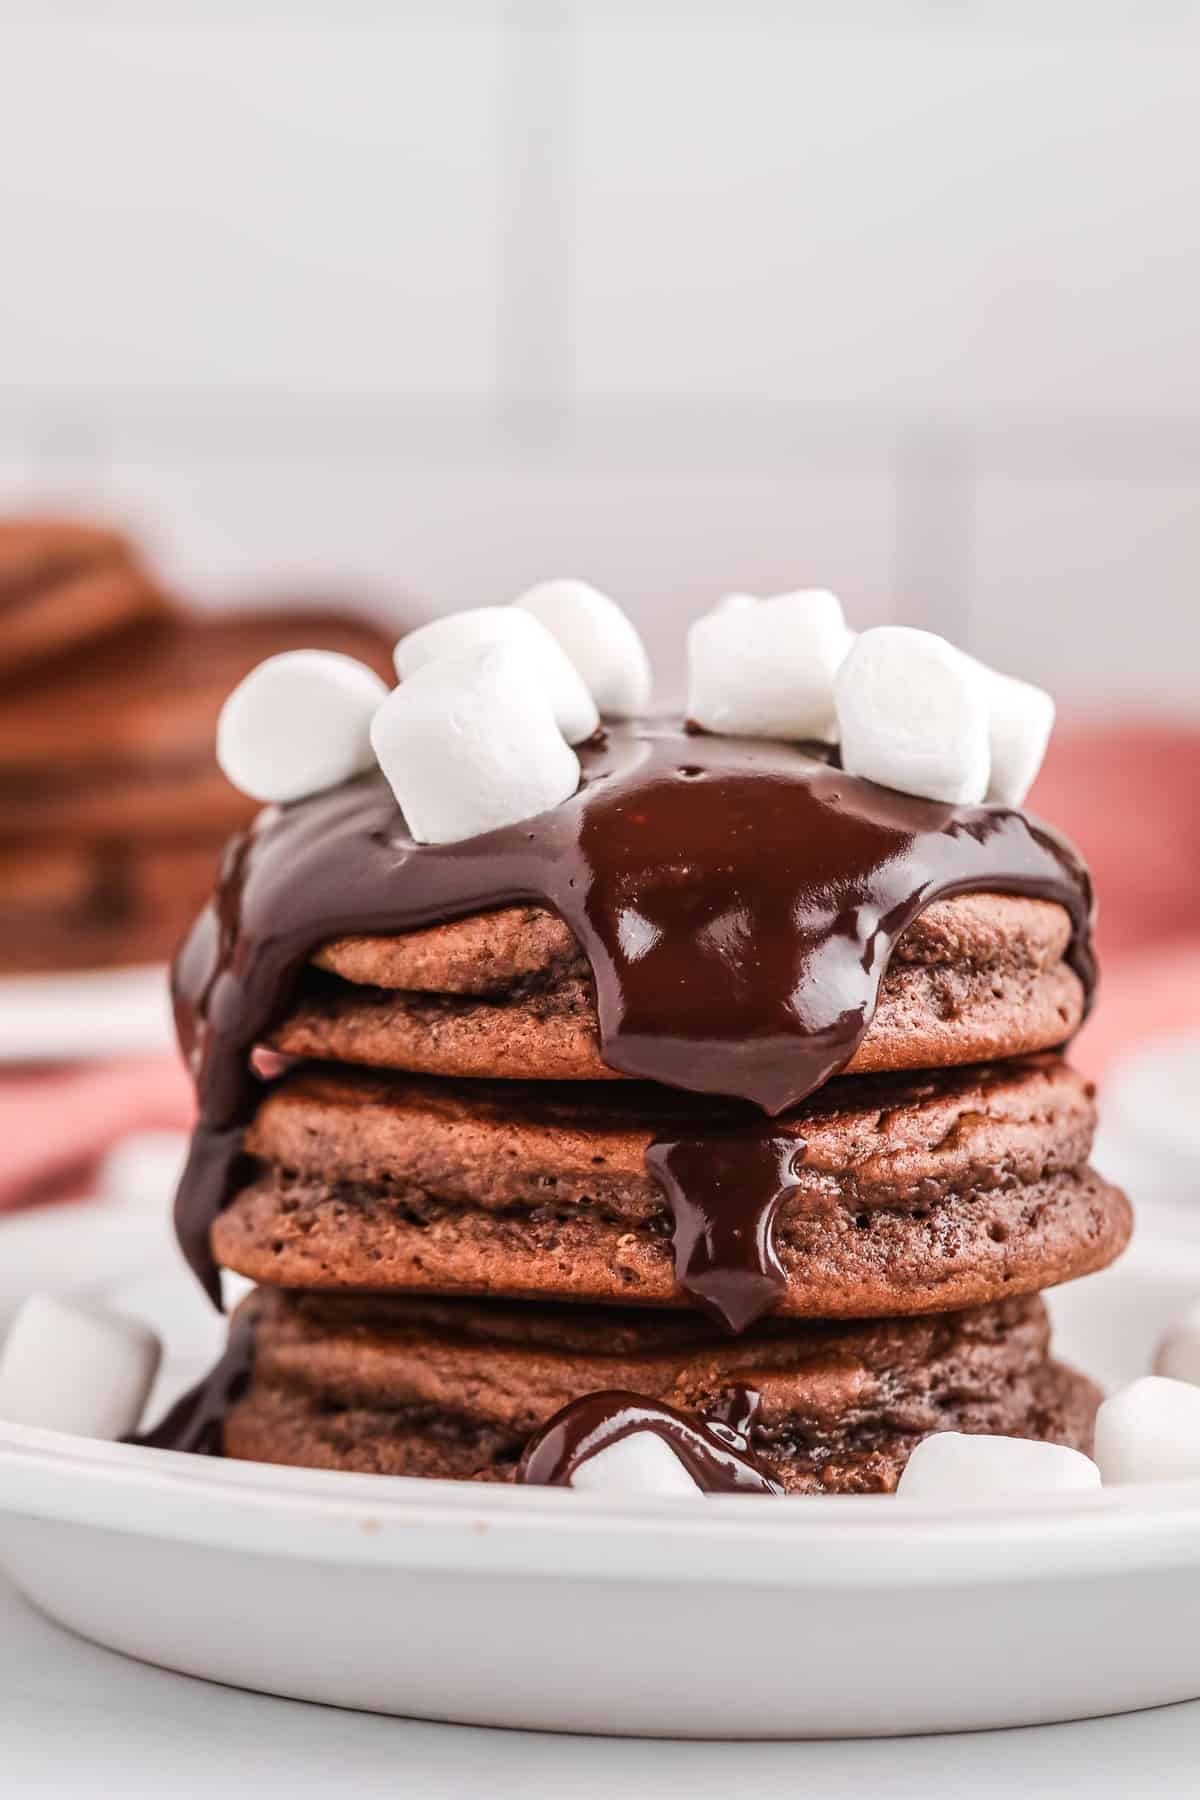 Stack of chocolate pancakes with chocolate ganache and marshmallows.